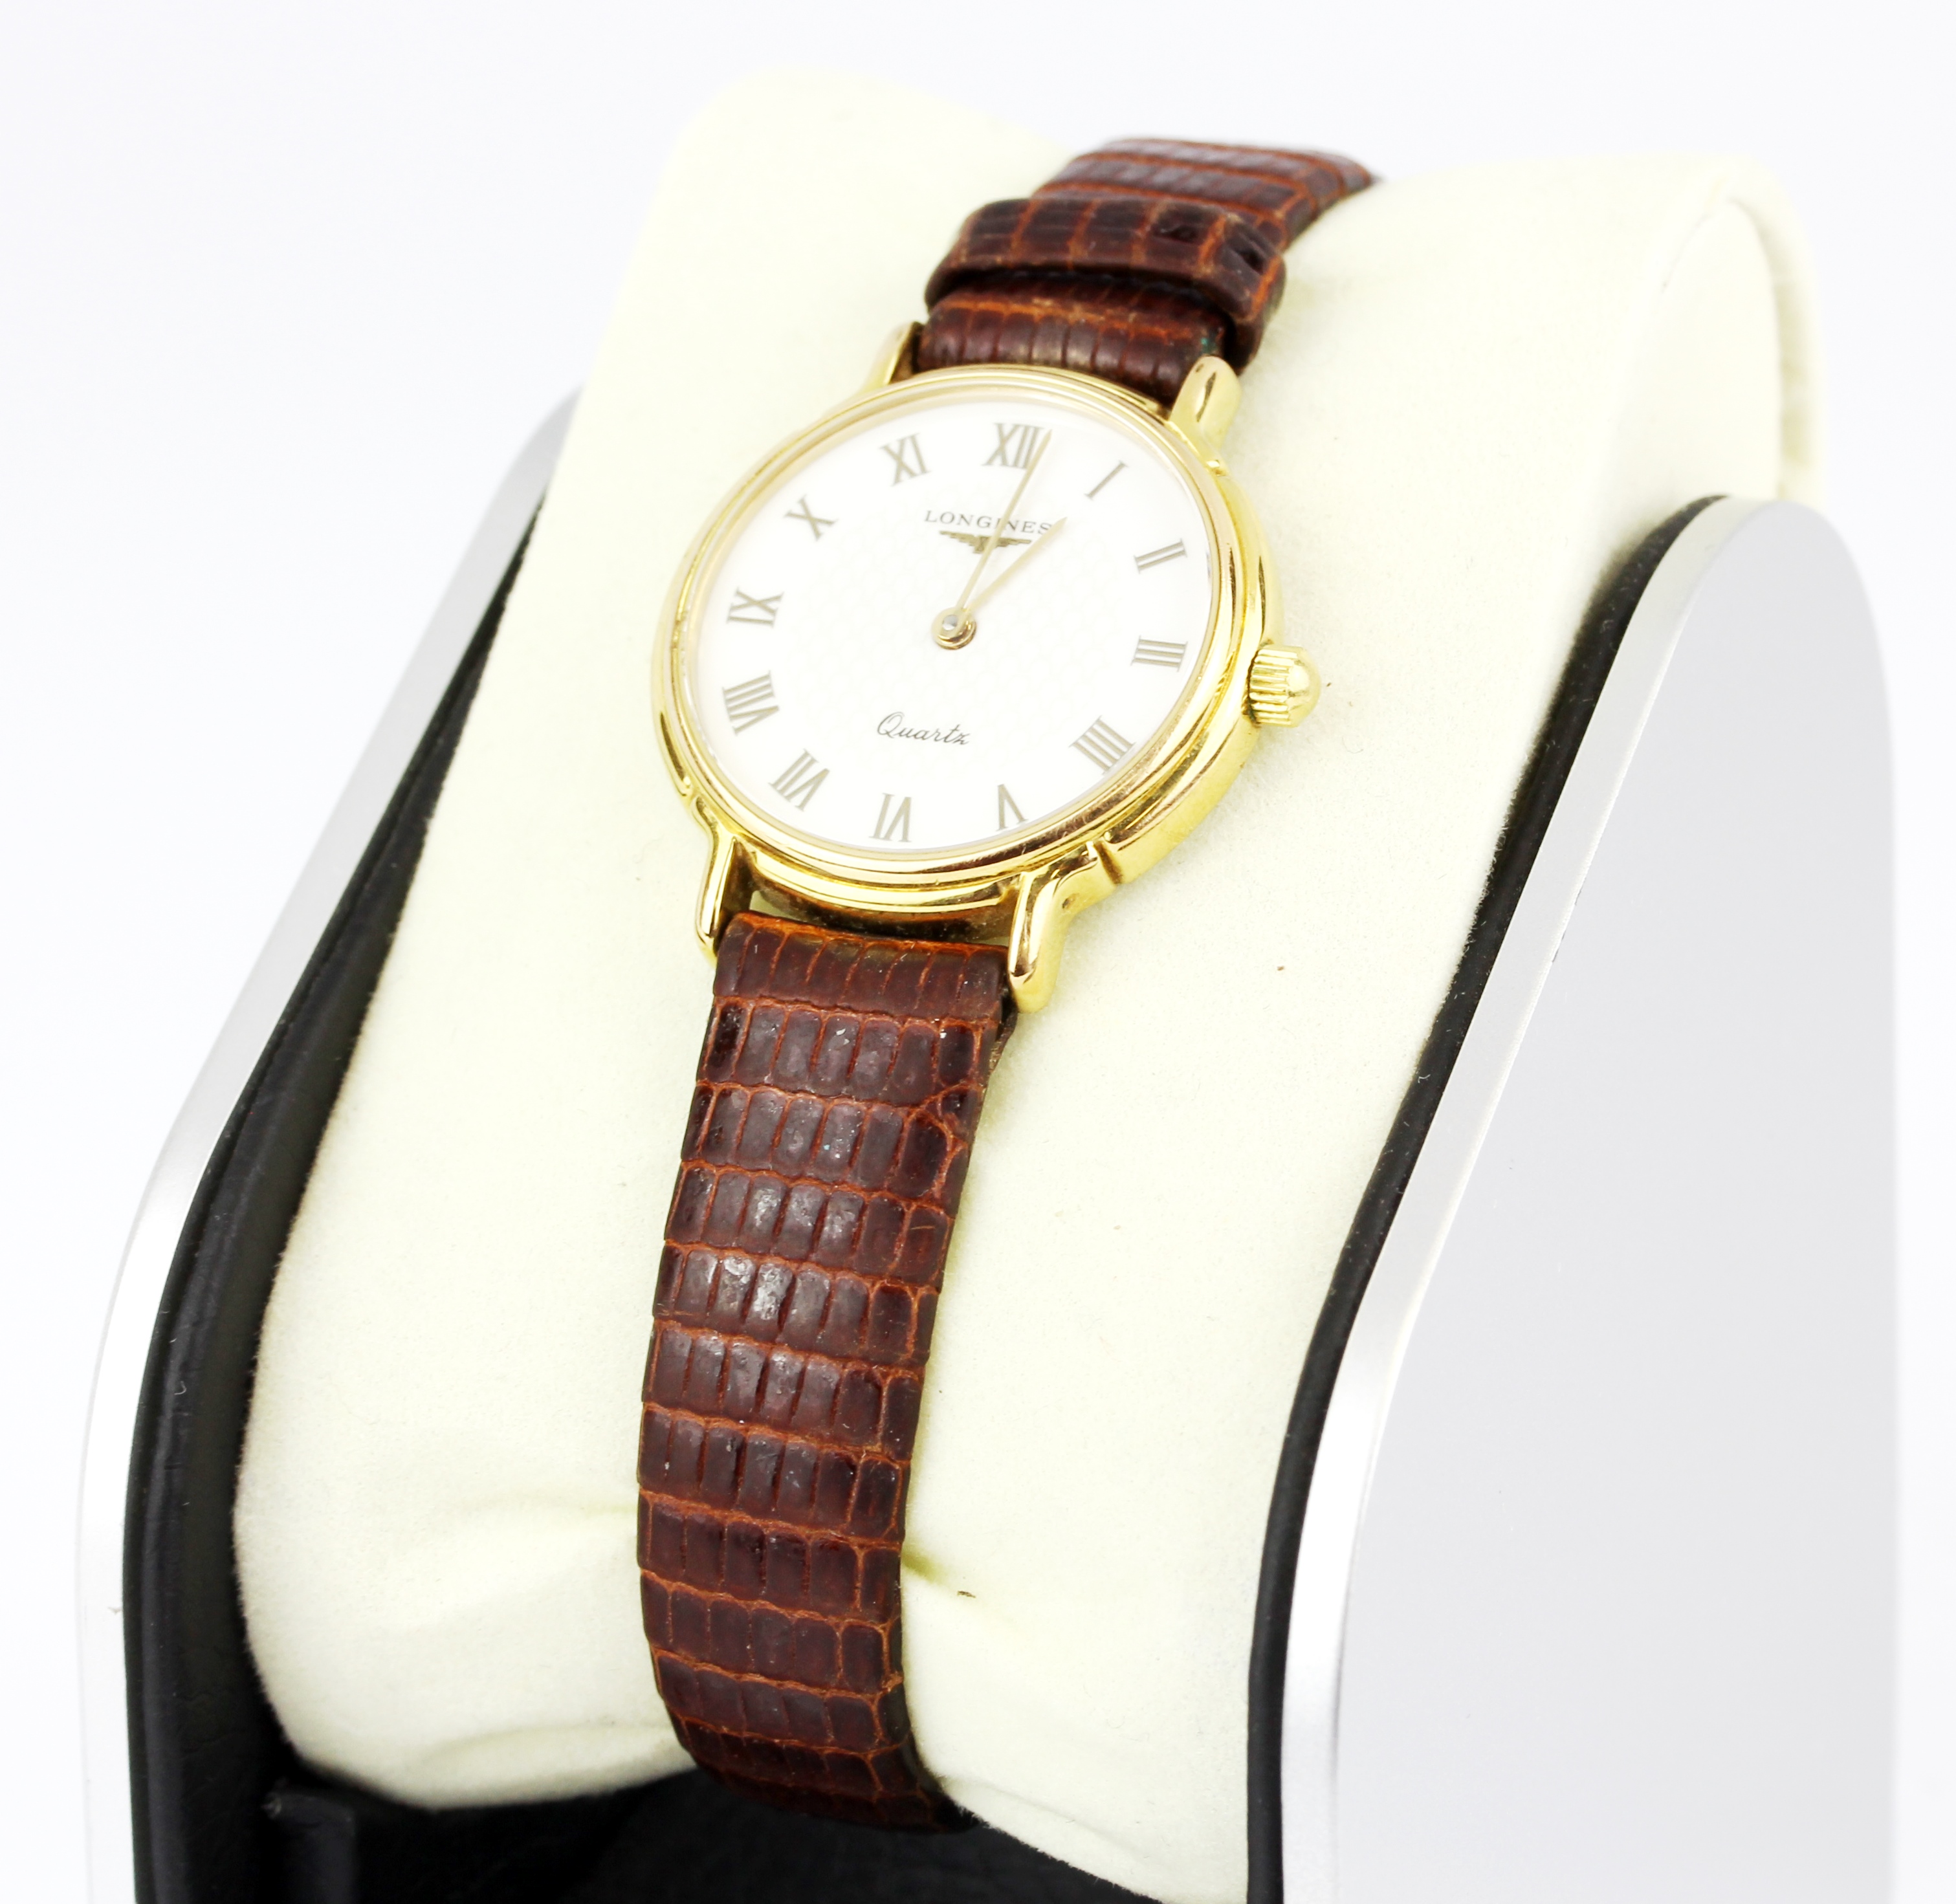 A Longines gold plated wristwatch (no. 24445181 7044) on a brown leather strap.